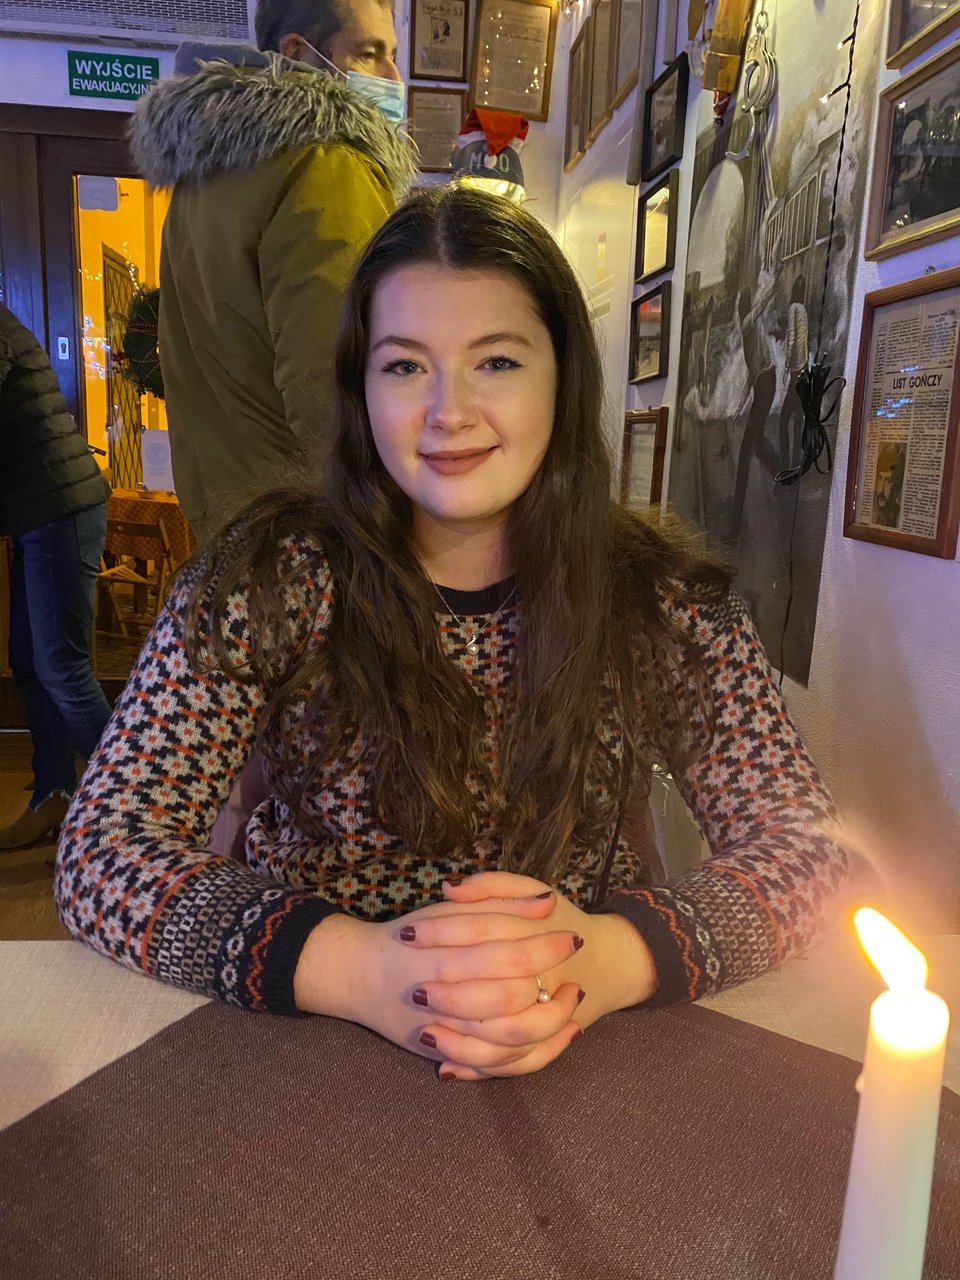 Ella dining at Konspira restaurant during her weekend in Wroclaw